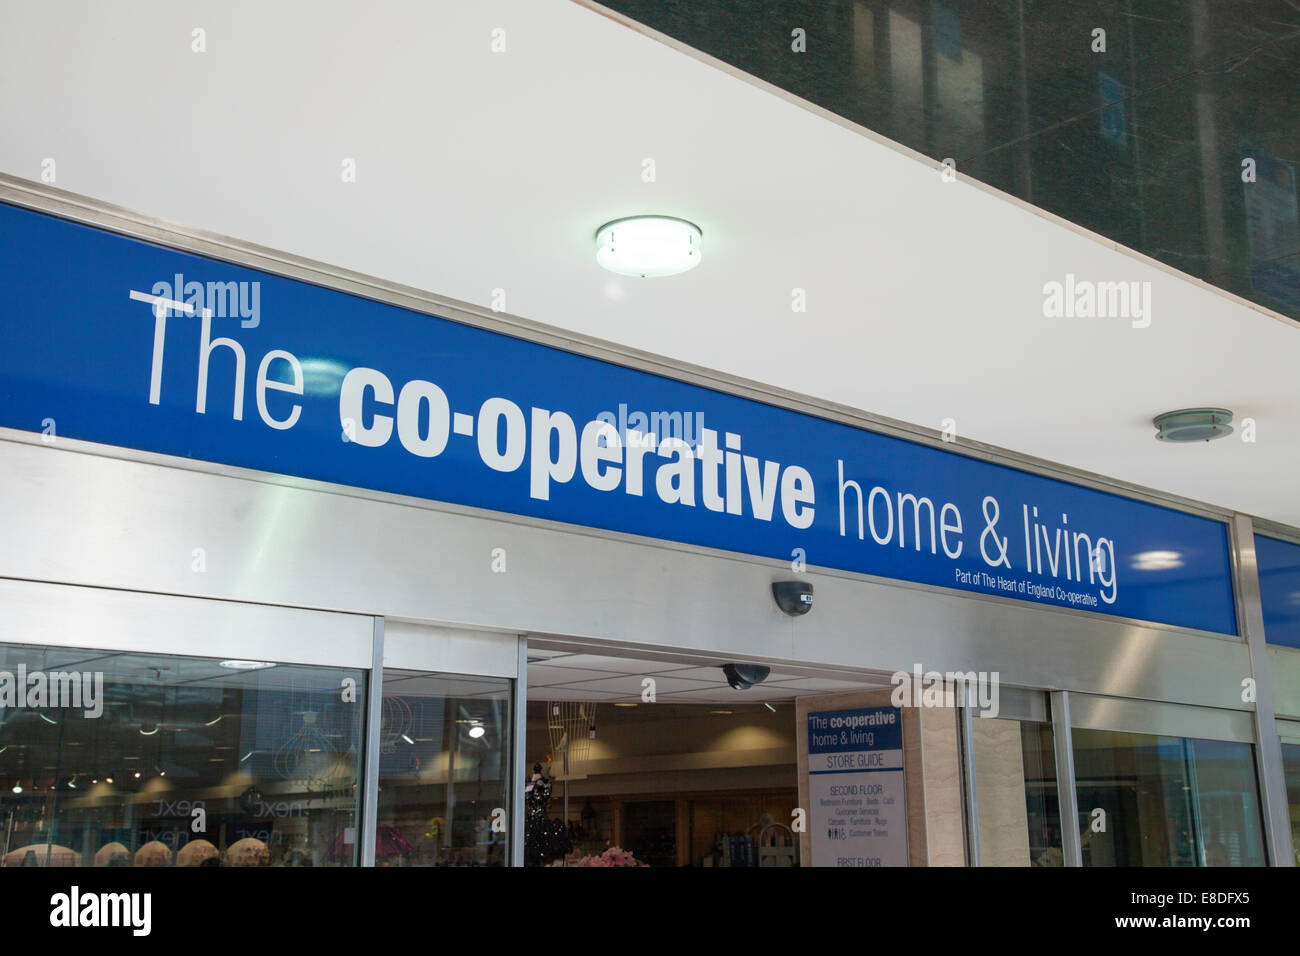 Un Co-operative home & living high street branch, England, UK Banque D'Images